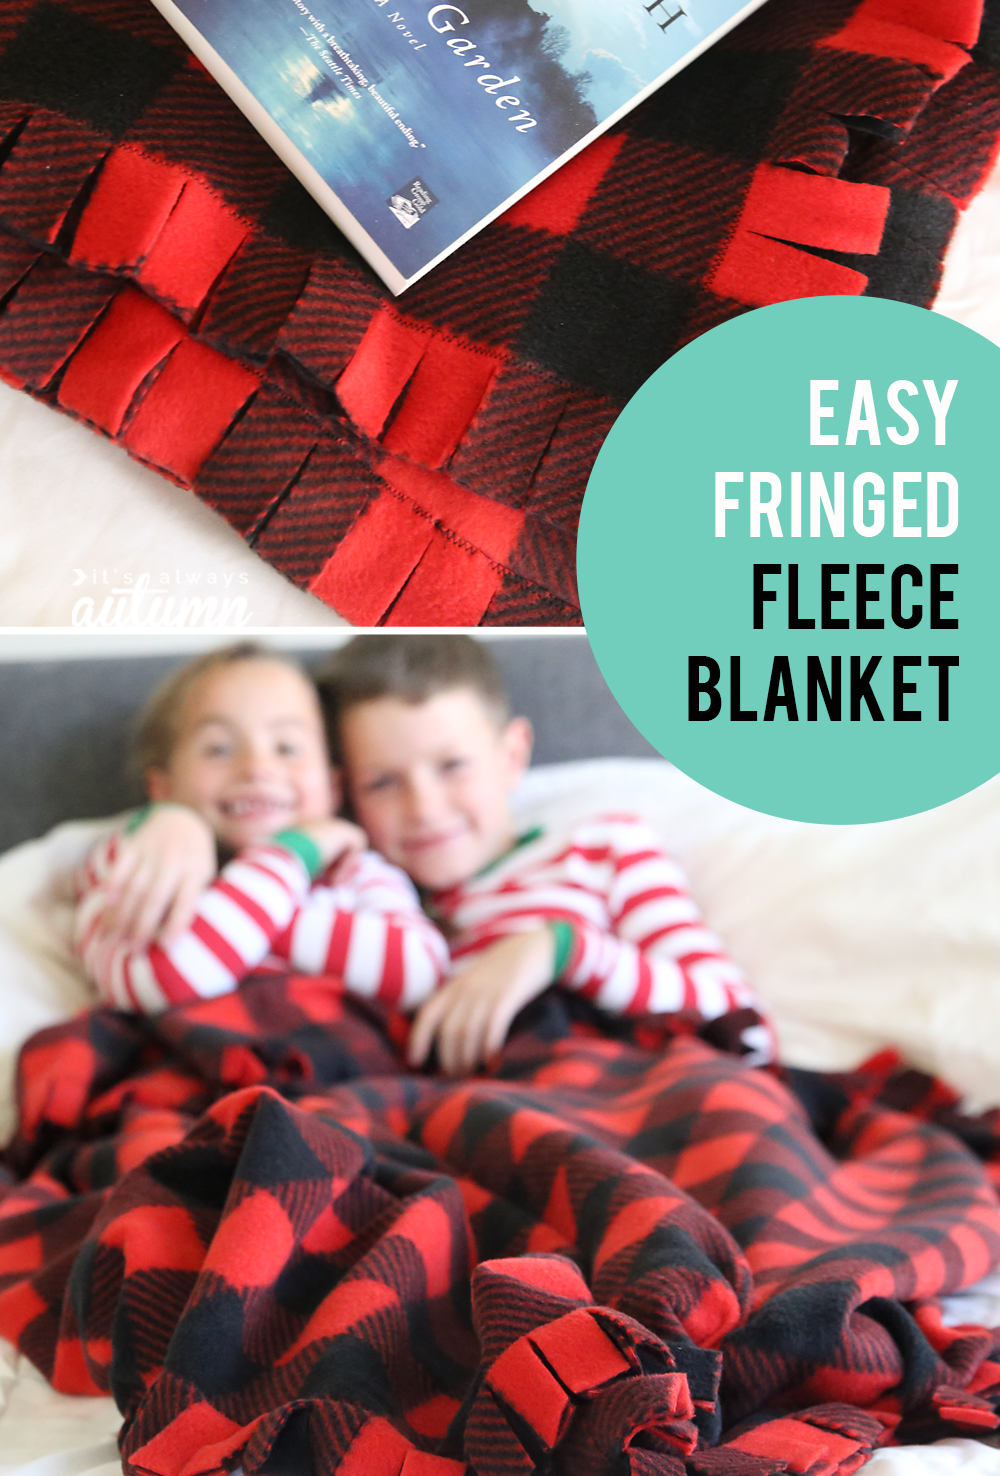 This fringed fleece blanket is easy to make and turns out so cute! Start making them now for Christmas. DIY gift idea.